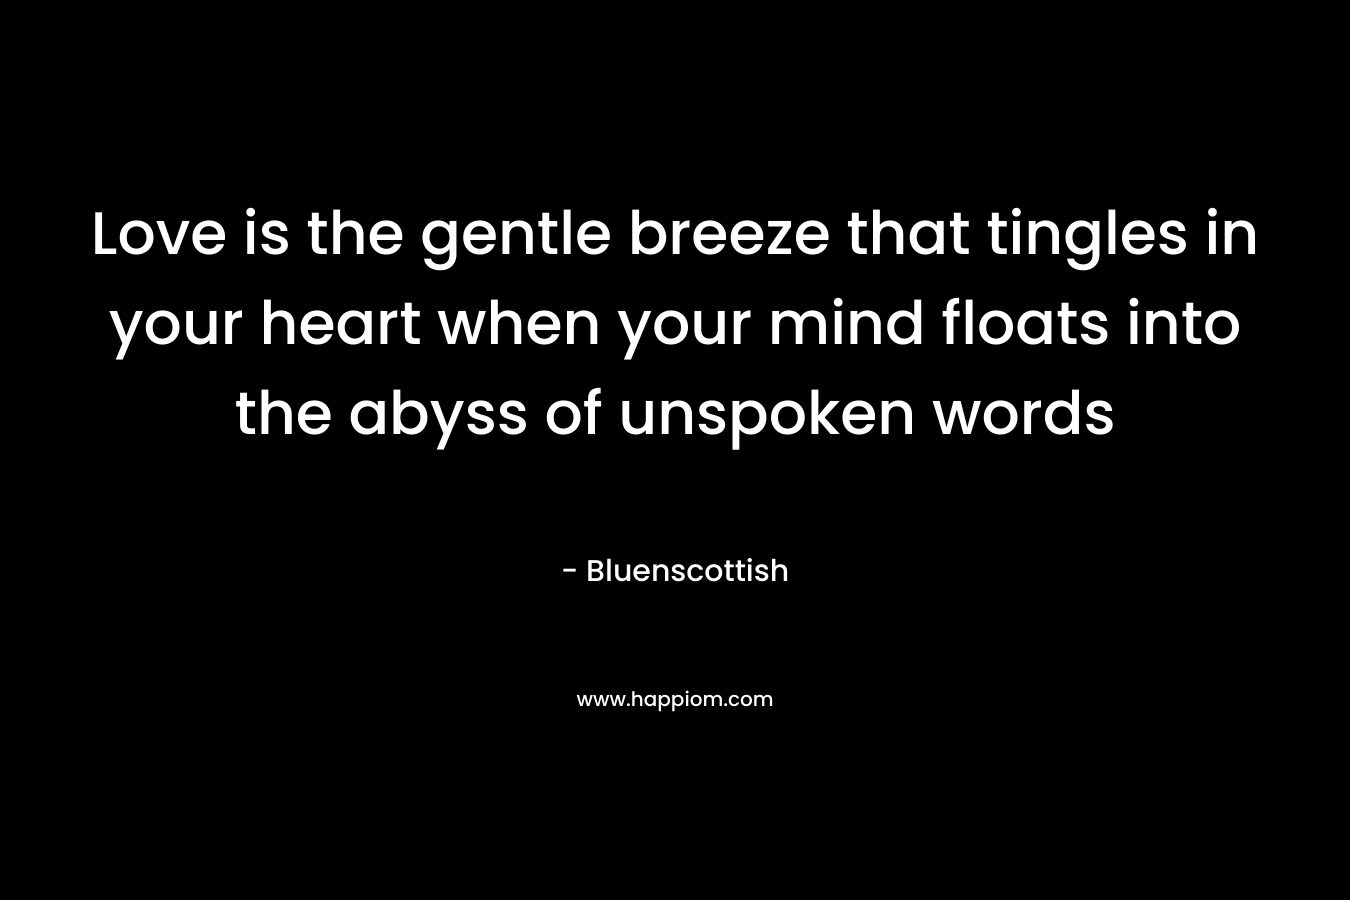 Love is the gentle breeze that tingles in your heart when your mind floats into the abyss of unspoken words – Bluenscottish